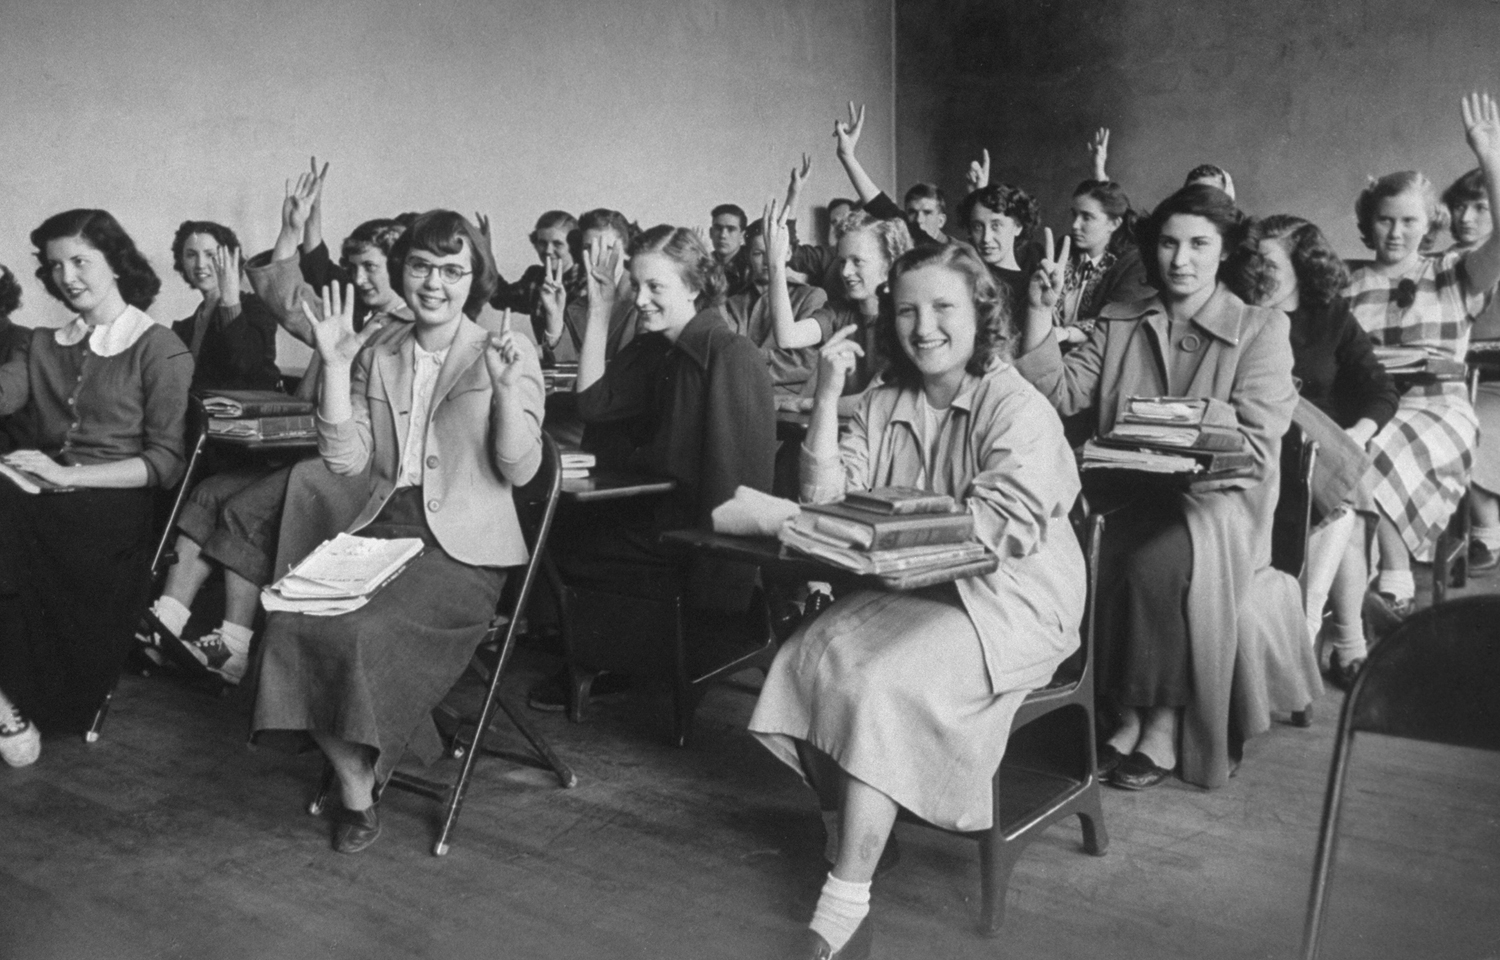 Senior-class girls indicating how many children they want, Leslie County High School, Ky., 1949